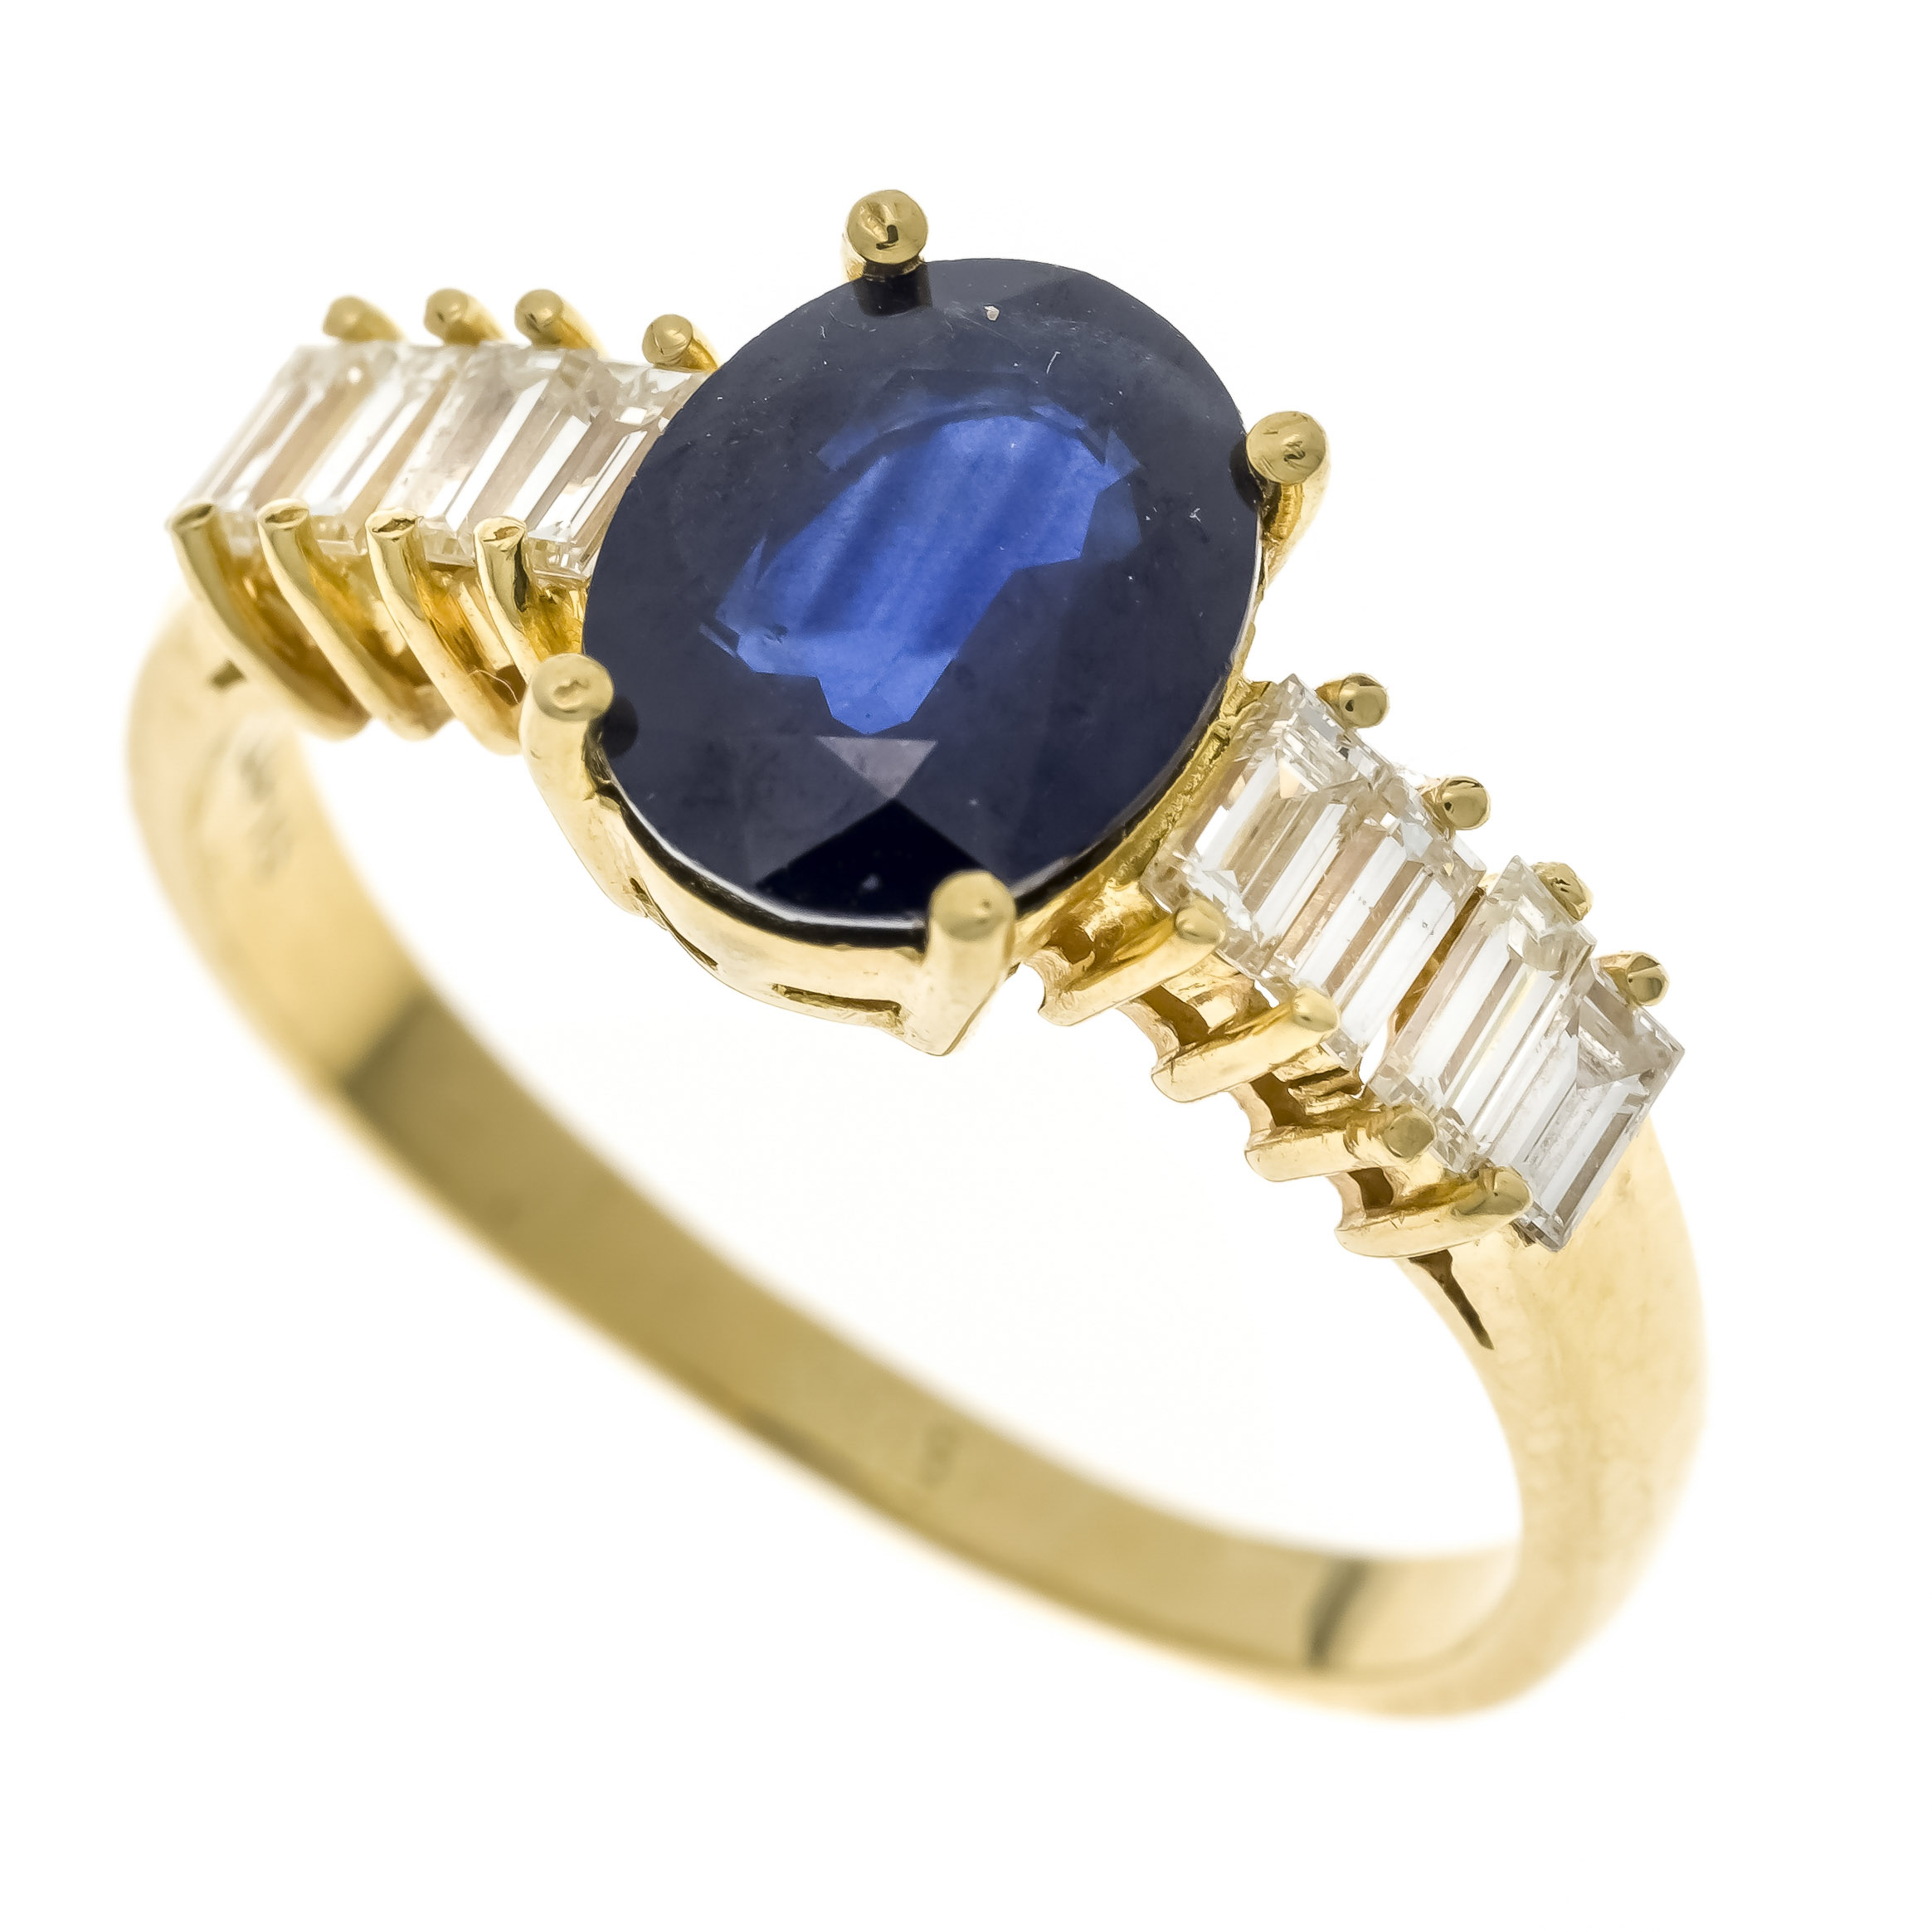 Sapphire-diamond ring GG 750/000 with an oval faceted sapphire 2.5 ct blue, translucent, color